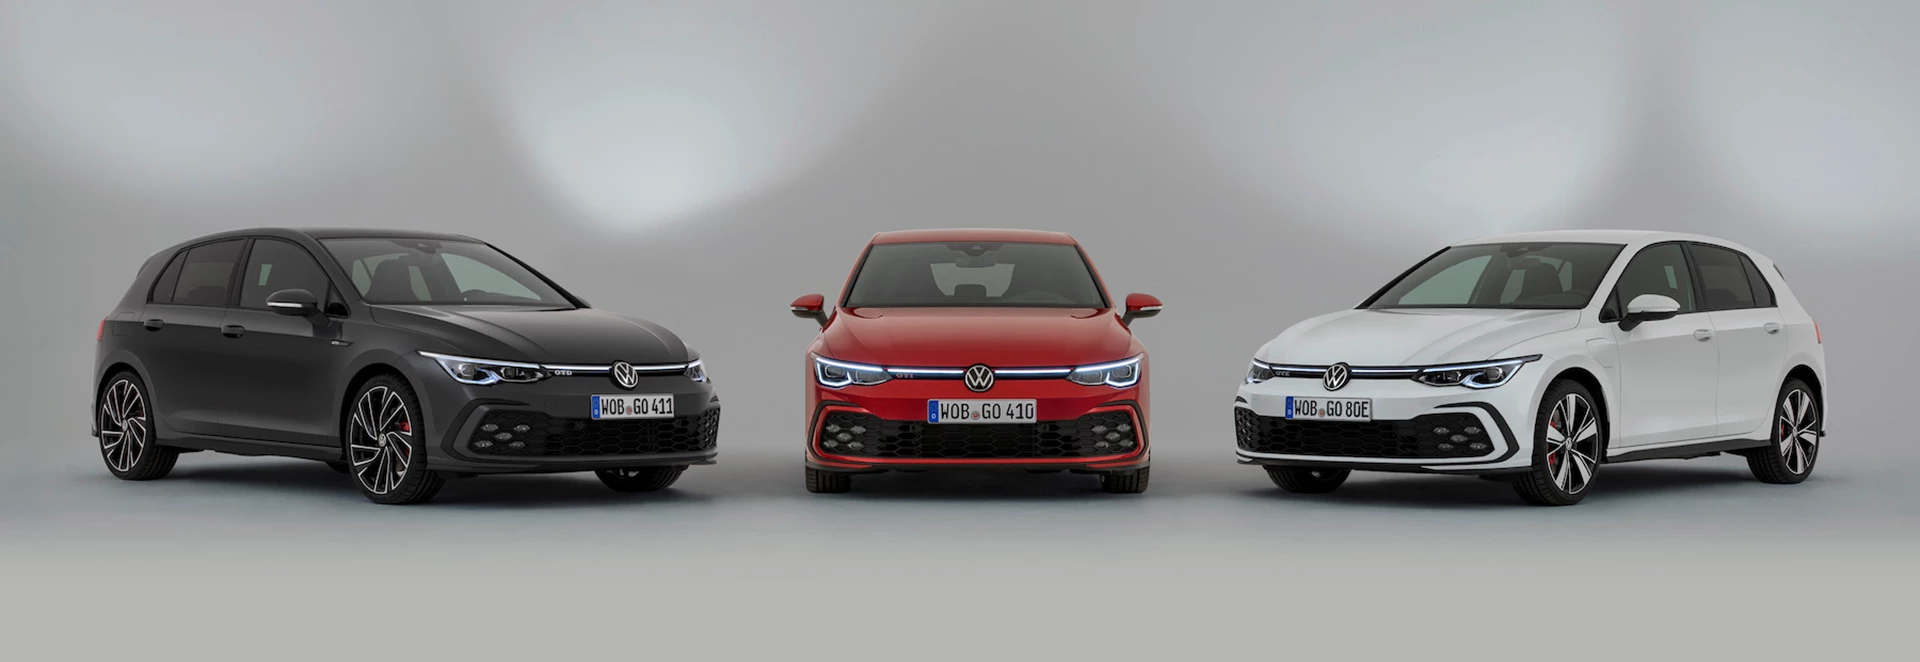 Sporty hot hatch duo: Volkswagen Golf GTI and GTD revealed